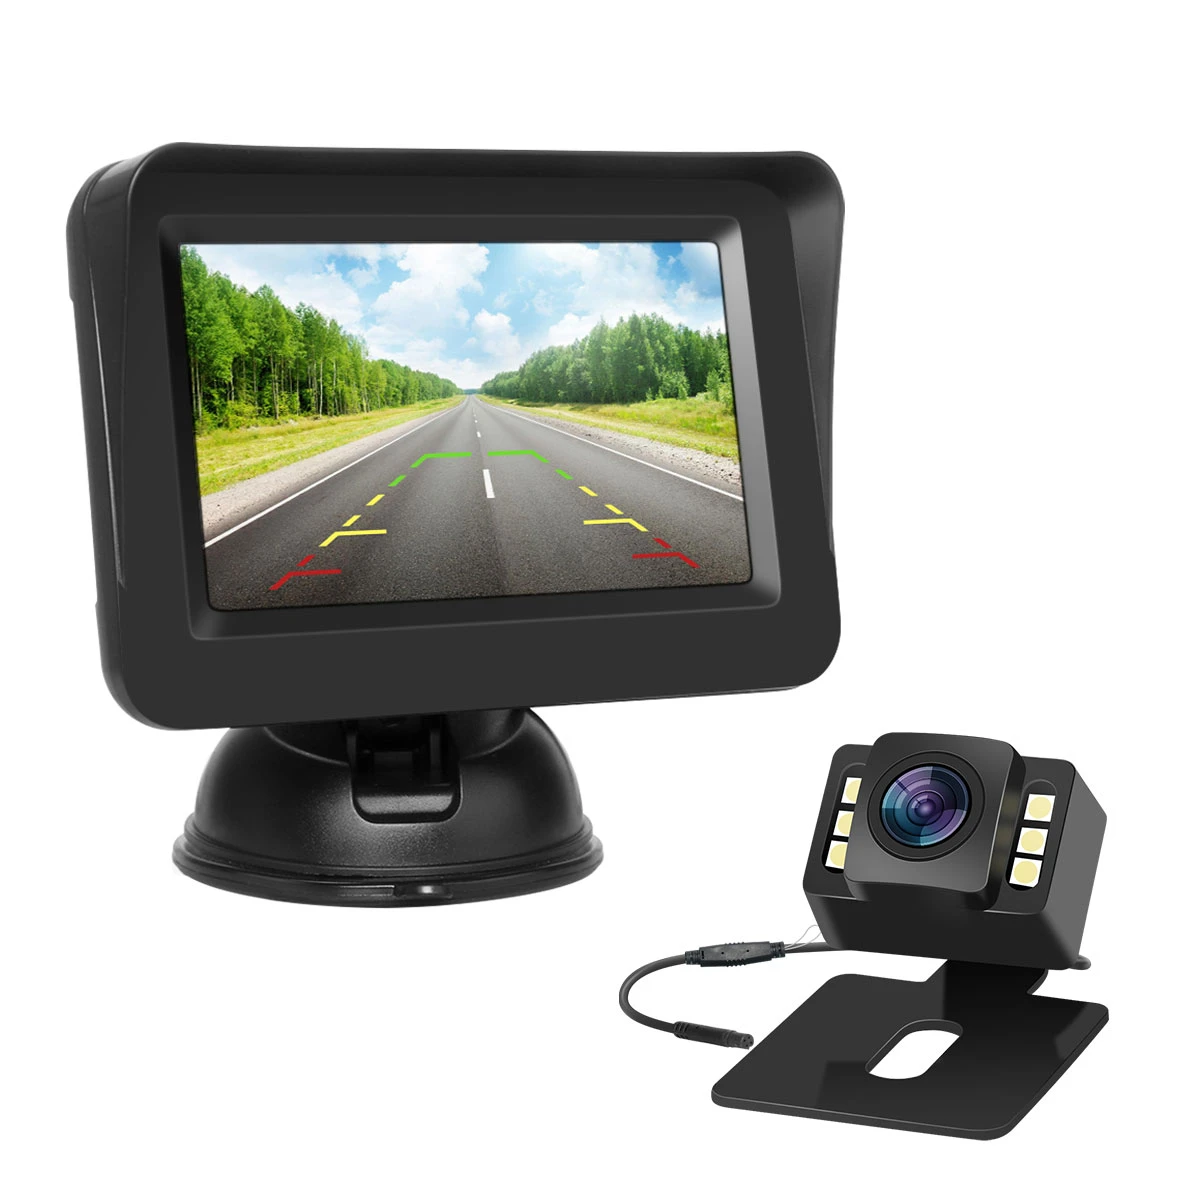 China Online Trades Easy Wired Waterproof Shockproof Installation 4.3in 12V Streaming Video Car Rear View Monitors Car Camera